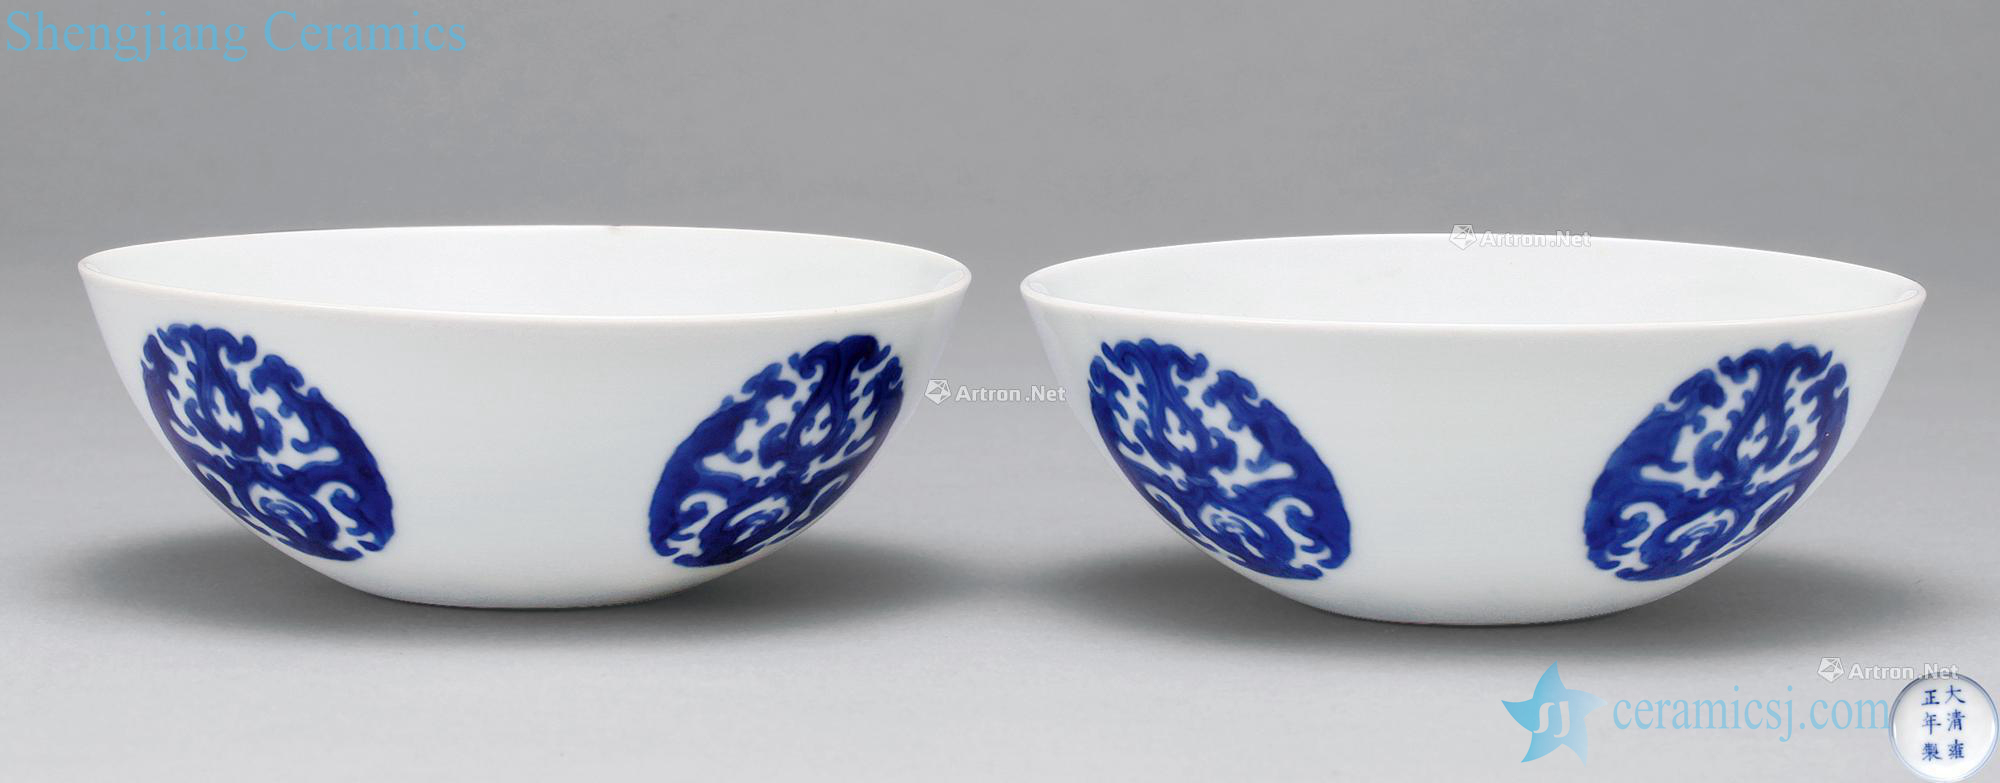 Qing yongzheng Blue and white spends lie the foot bowl (2)